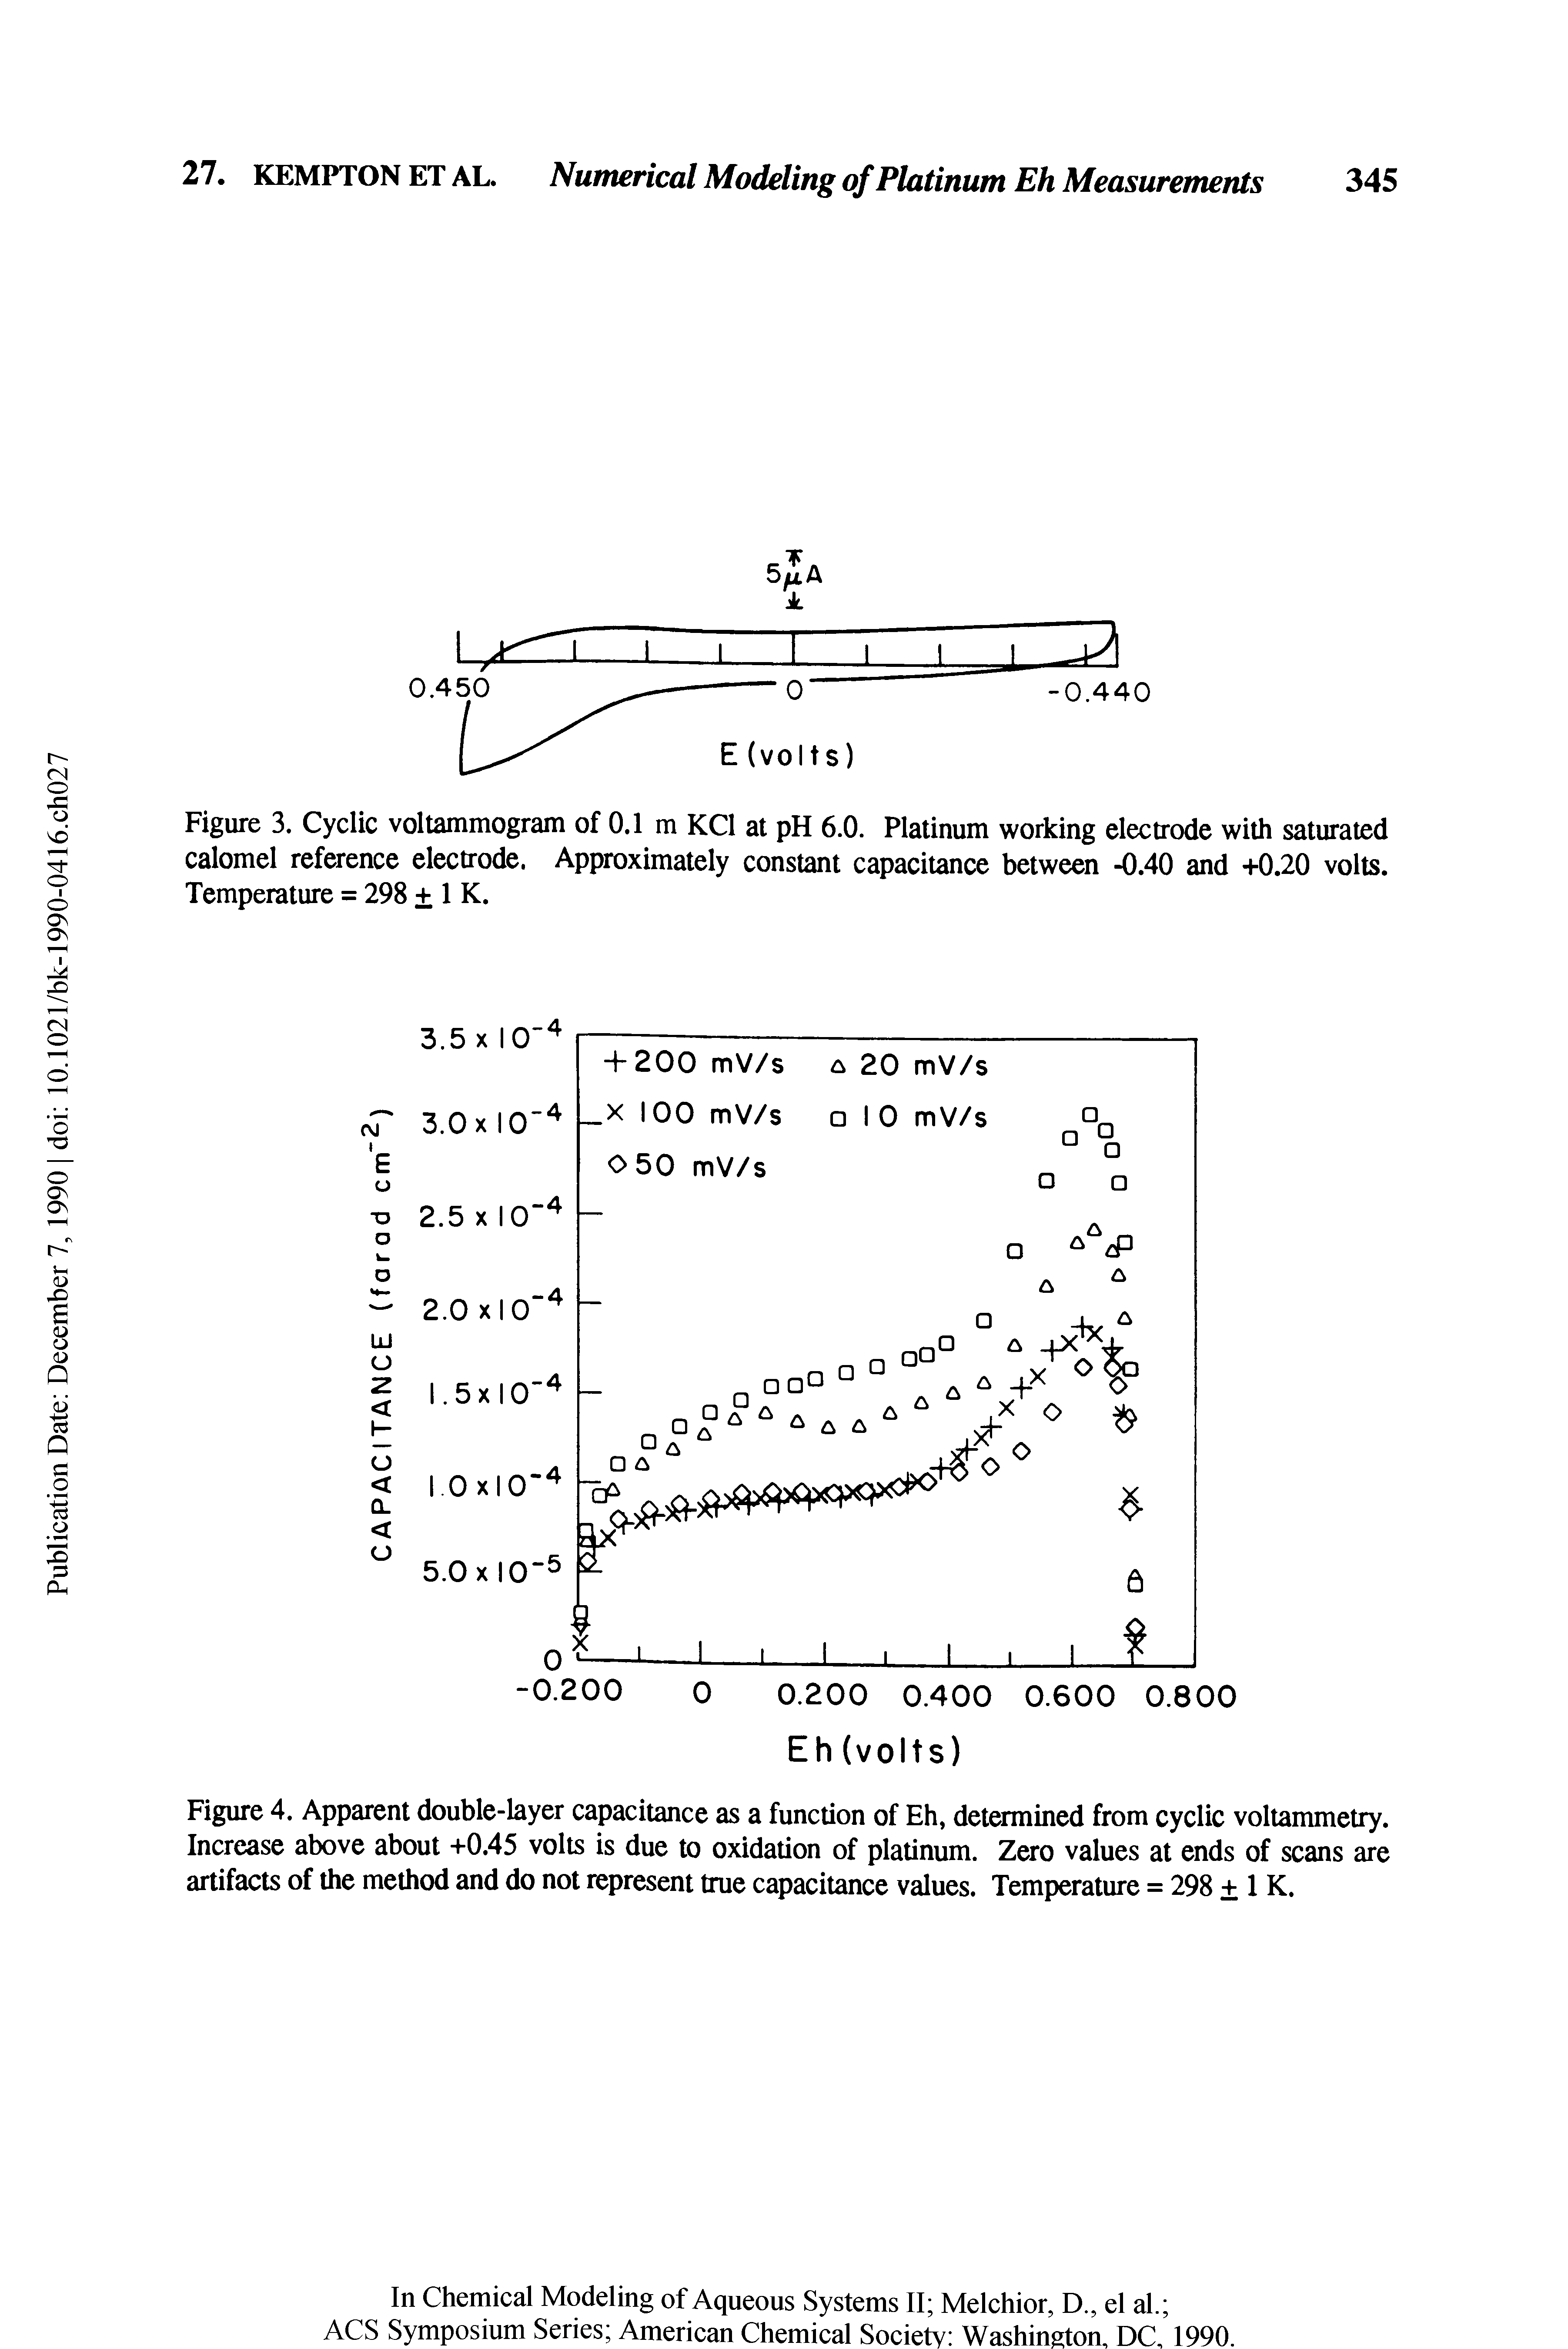 Figure 4. Apparent double-layer capacitance as a function of Eh, determined from cyclic voltammetry. Increase above about +0.45 volts is due to oxidation of platinum. Zero values at ends of scans are artifacts of the method and do not represent true capacitance values. Temperature = 298 + 1 K.